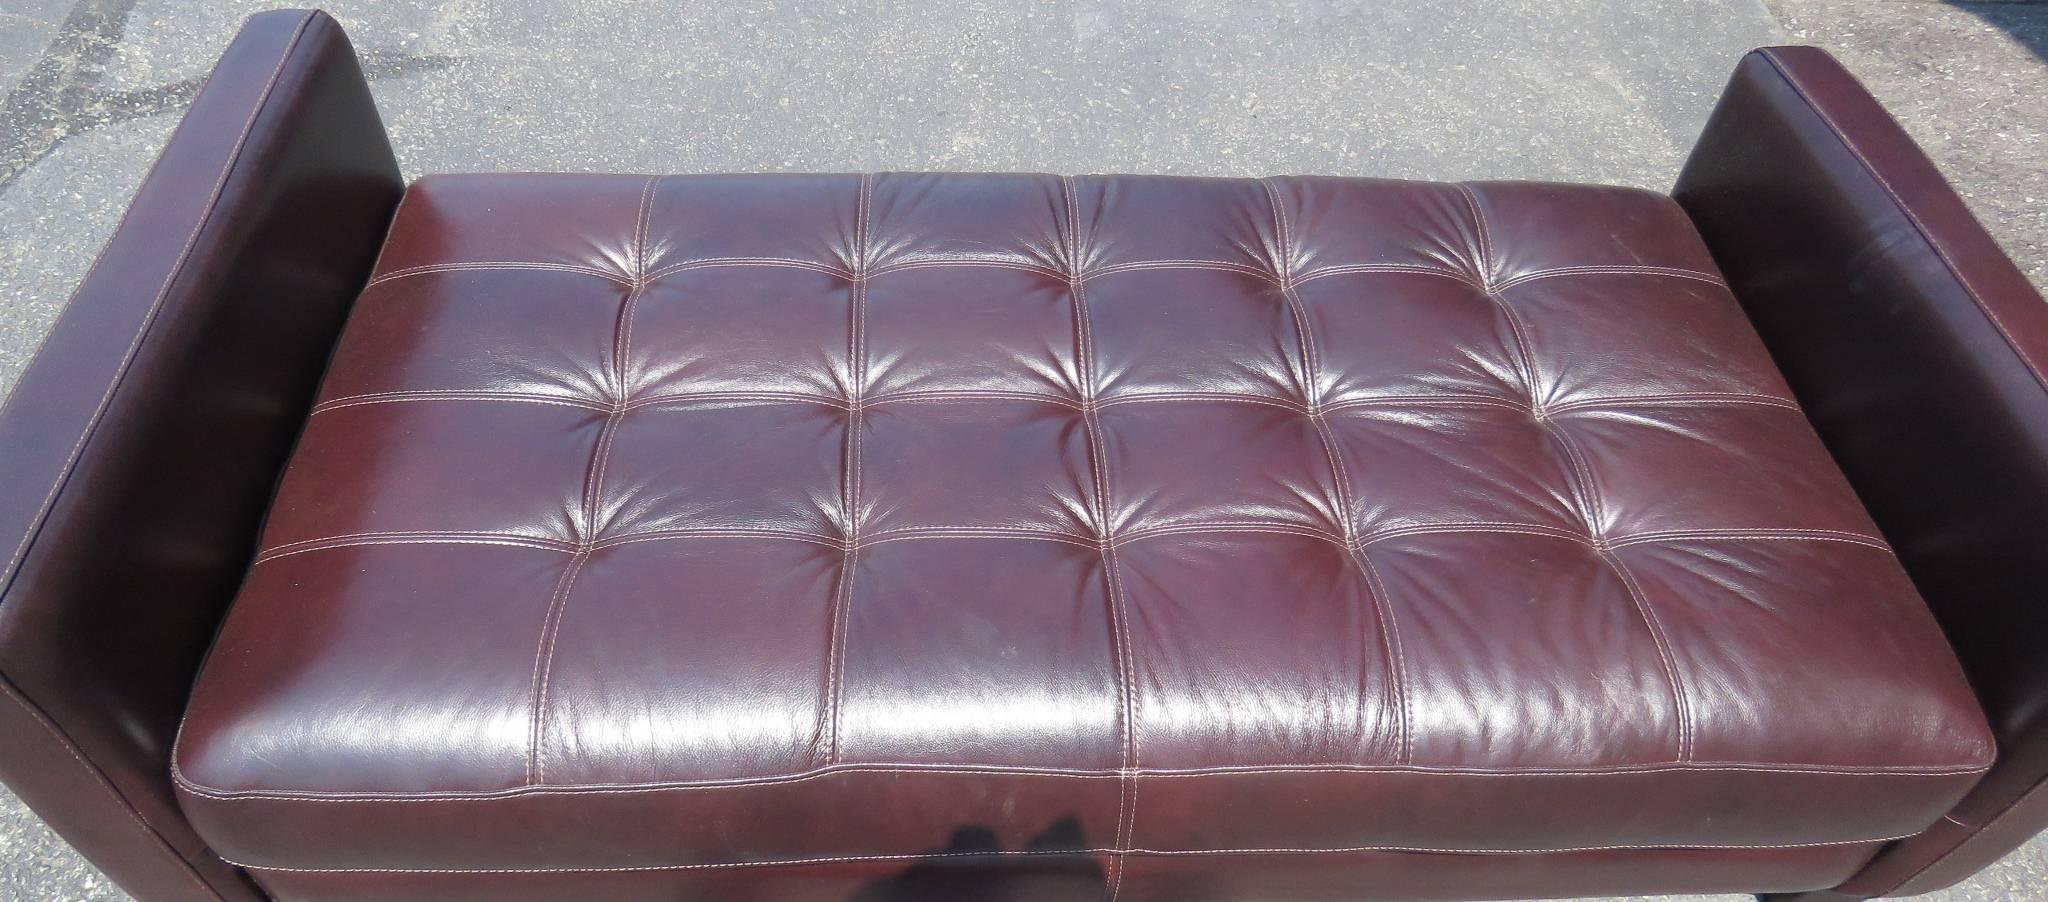 Brown tufted leather daybed. Wood legs. 